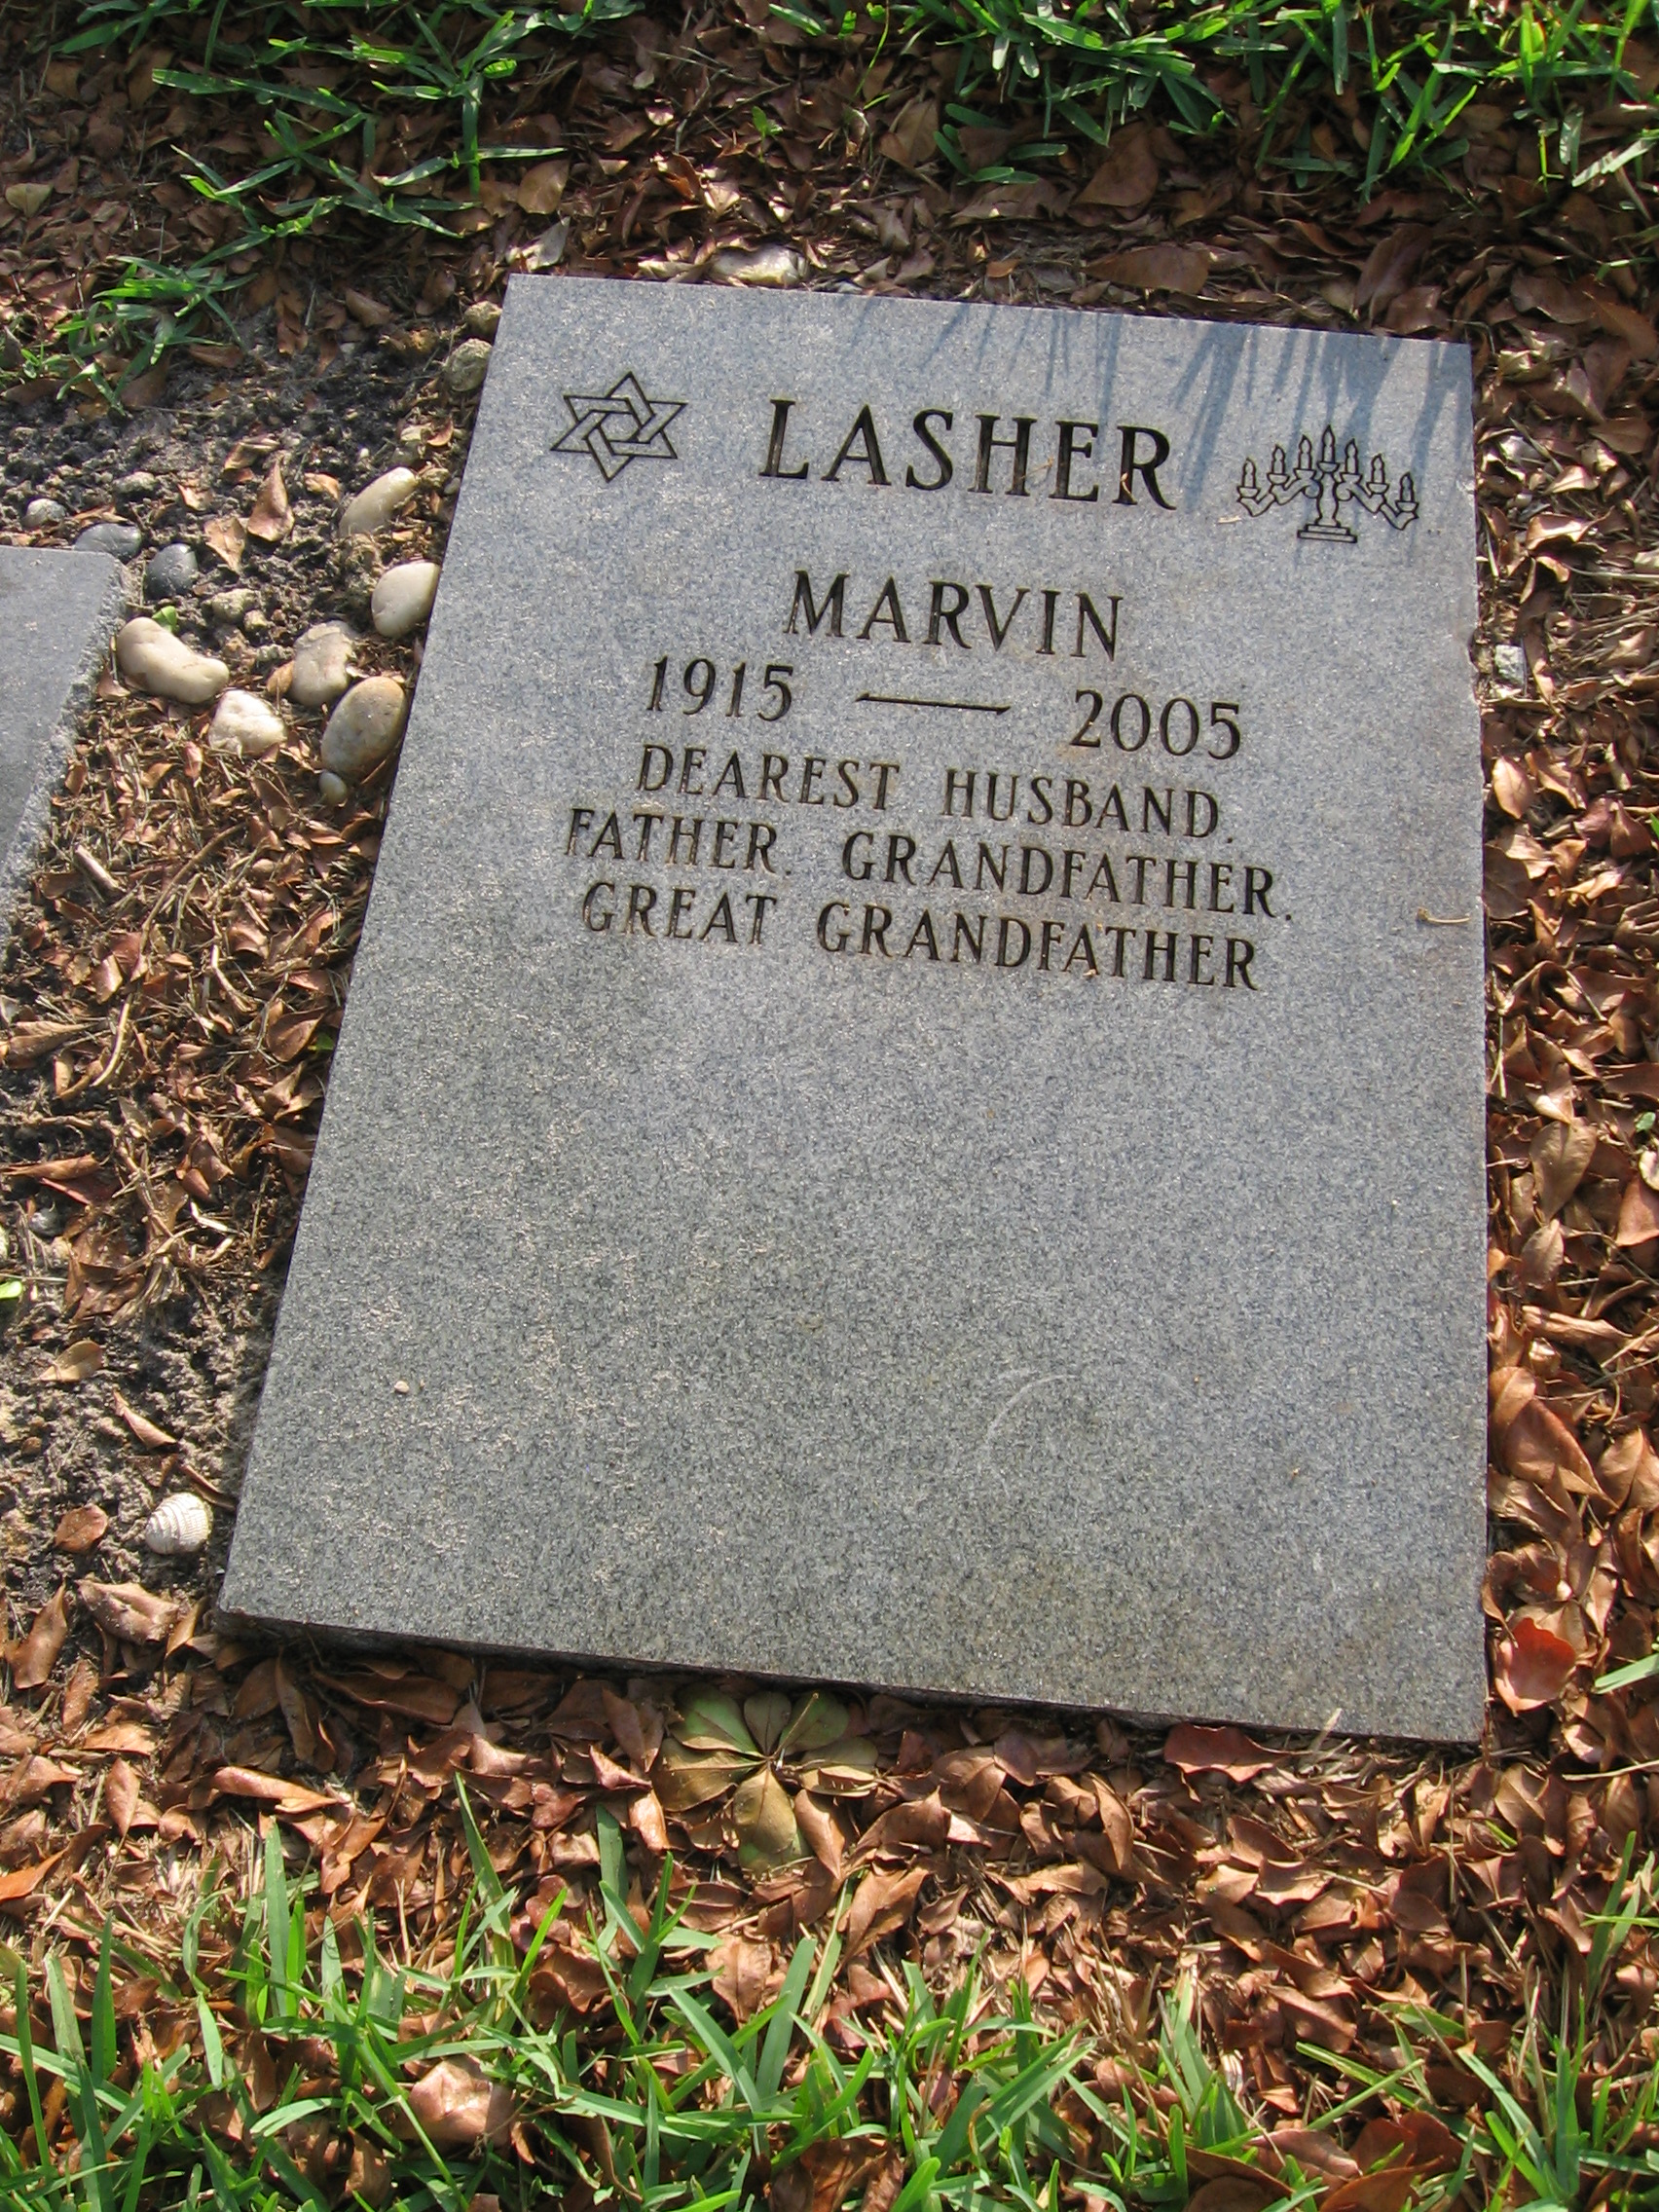 Marvin Lasher